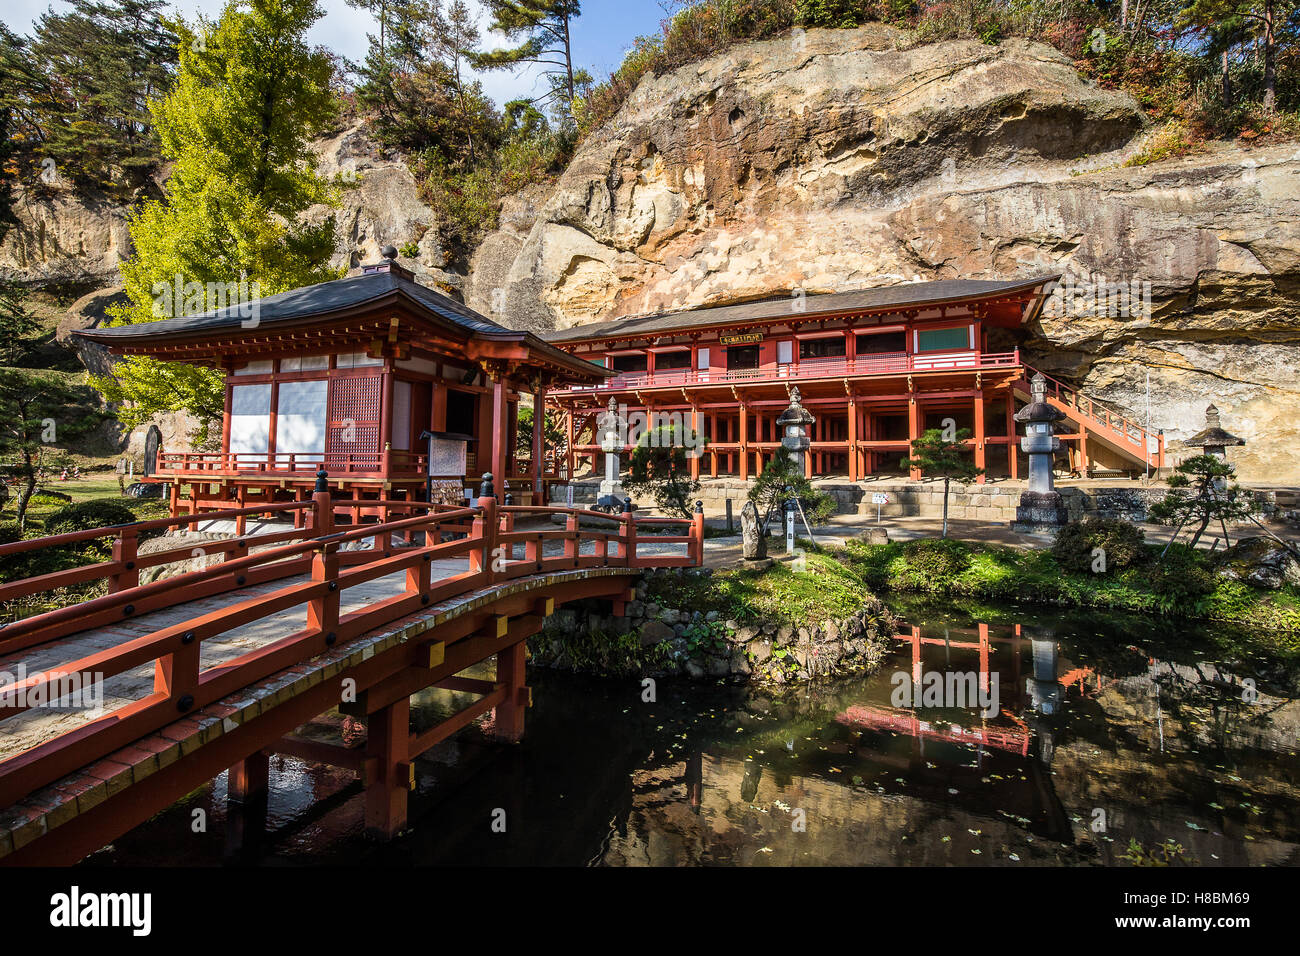 Takkoku no Iwaya Temple was built embedded in the rock wall of a cliff 1,200 years ago during the early Heian period. Stock Photo